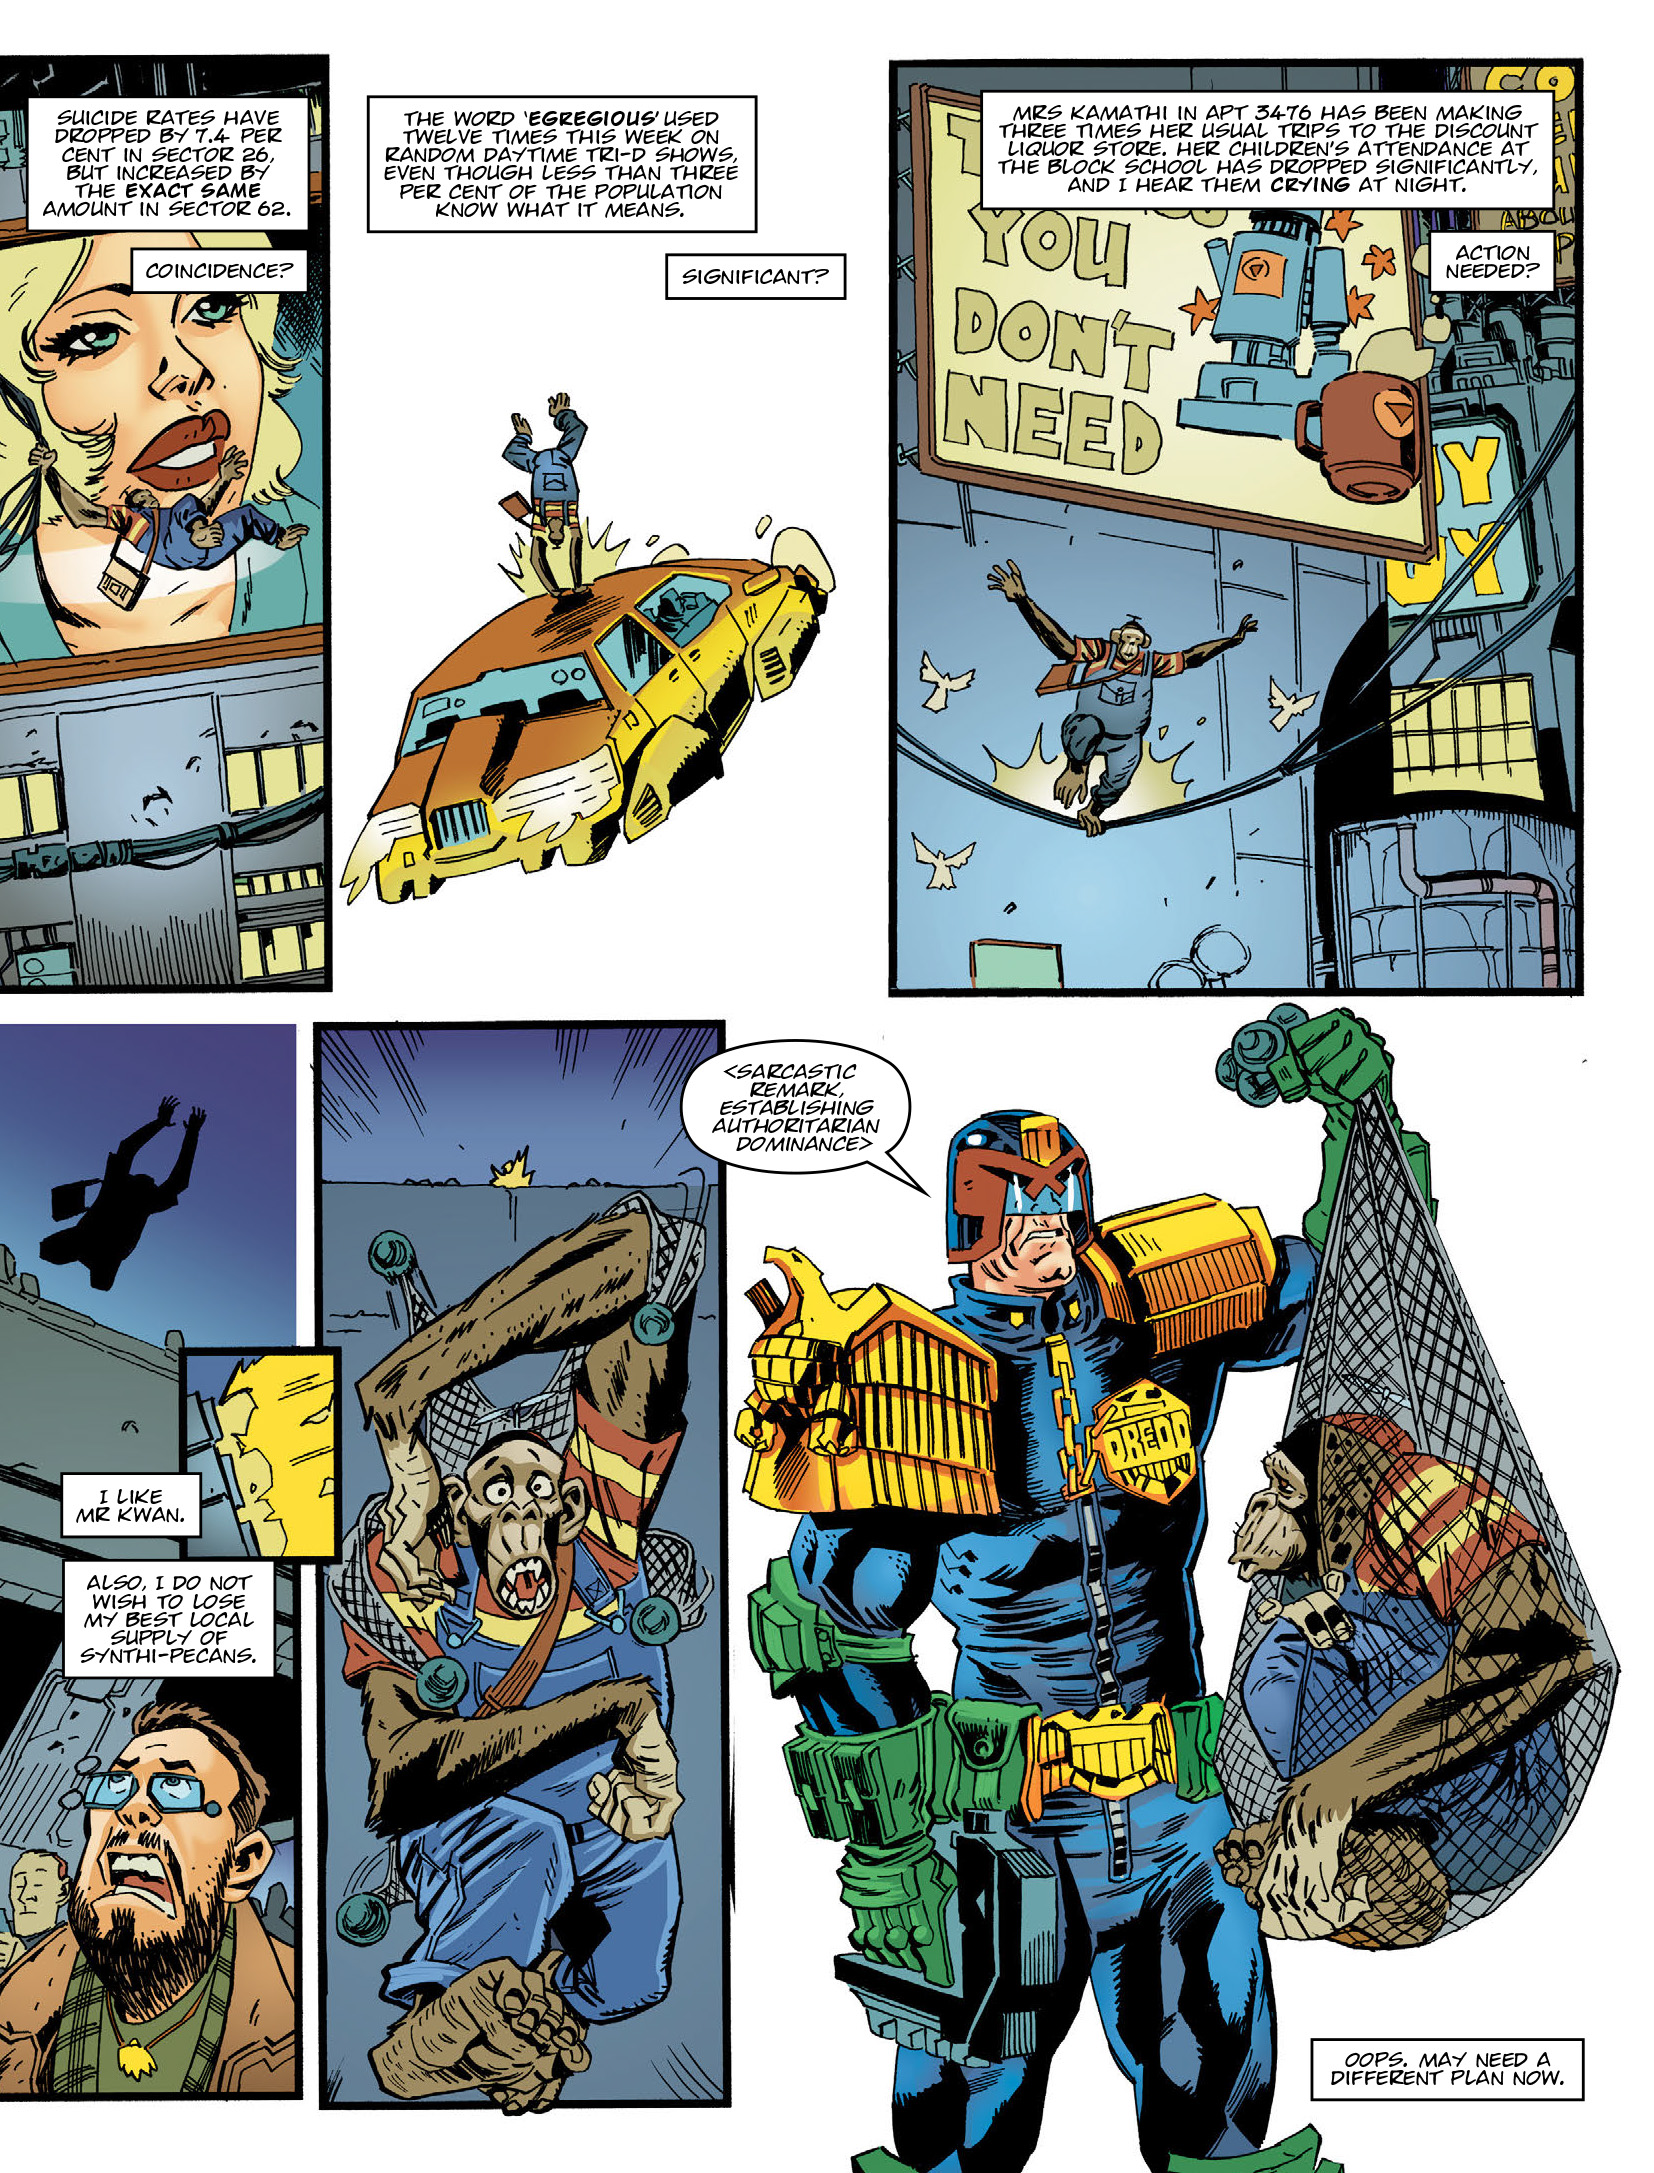 2000 AD: Chapter 2131 - Page 5